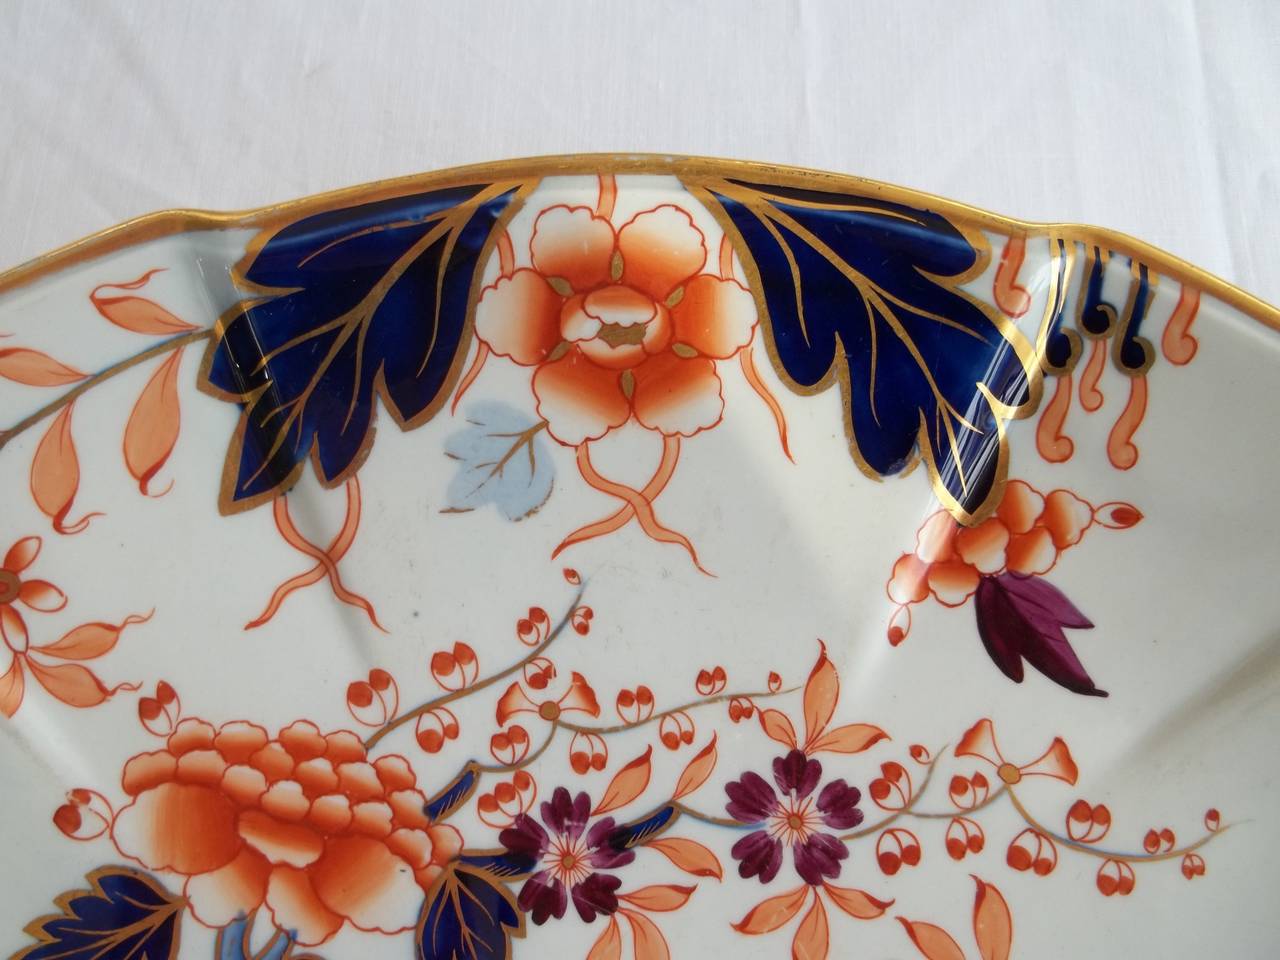 Hand-Painted Georgian Large Serving Platter or Dish by Davenport ironstone Ptn 37, Ca 1810